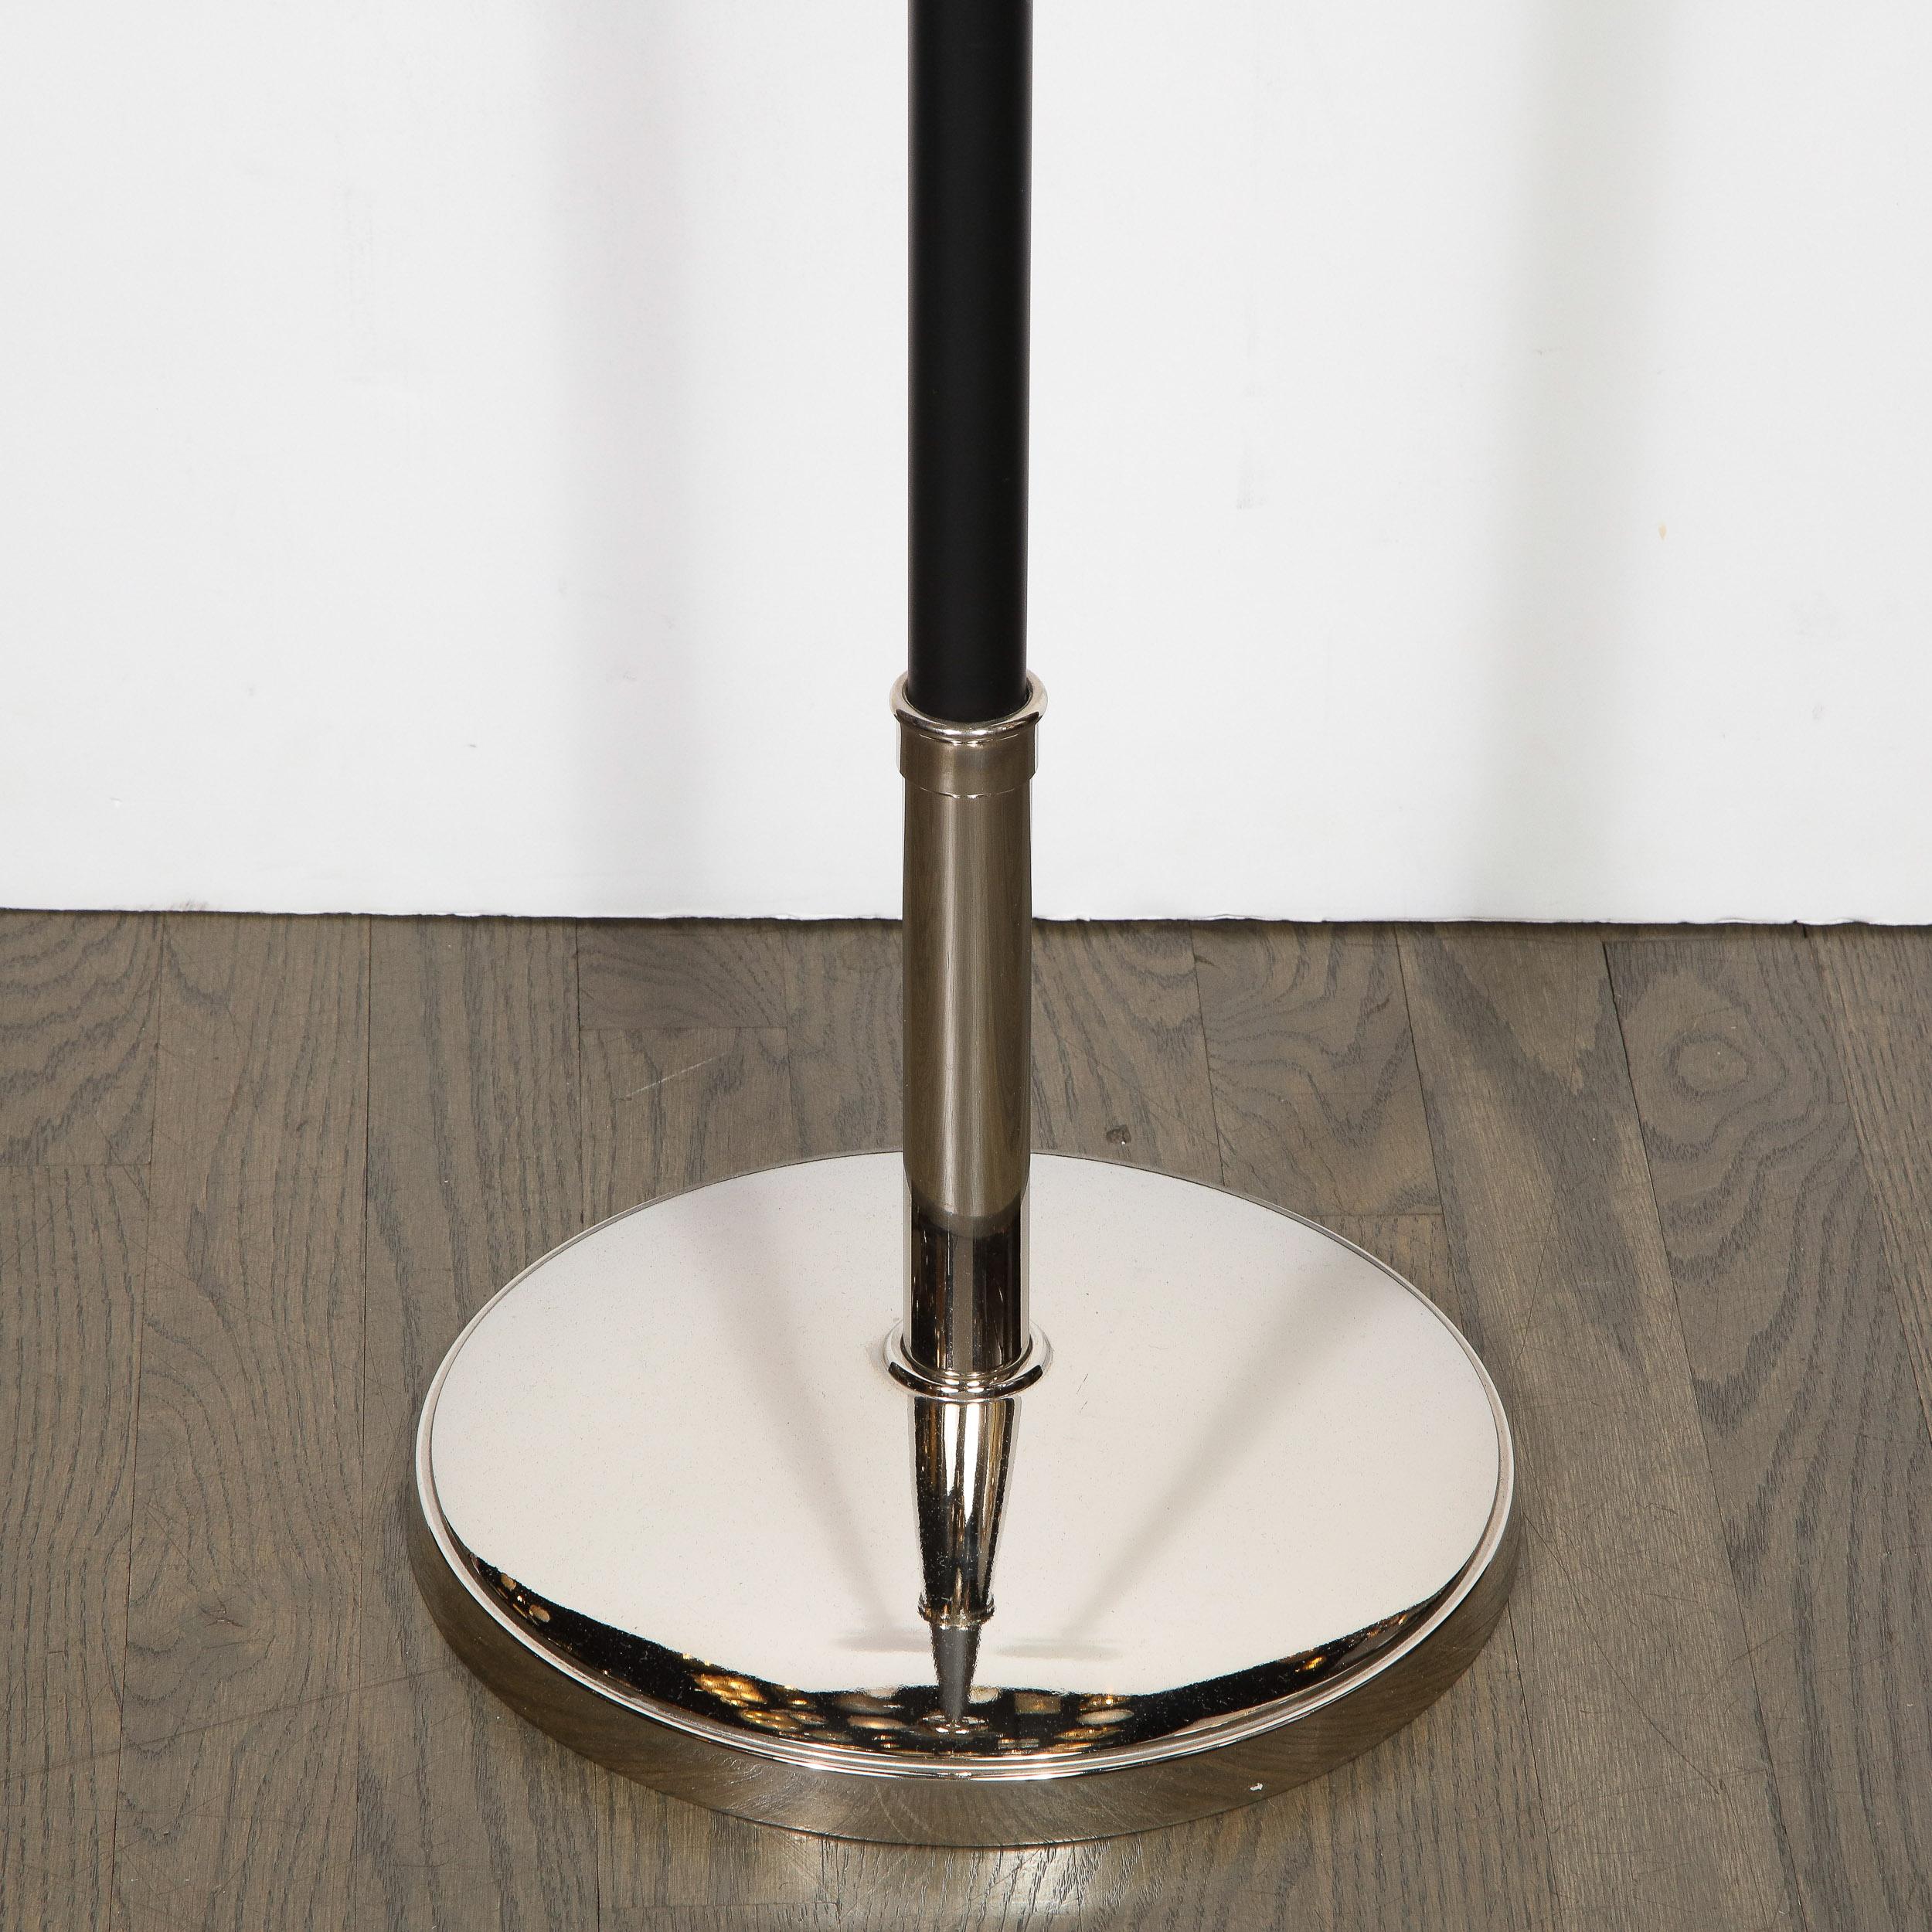 This refined Mid-Century Modern floor lamp was realized in the United States, circa 1950. Designed in the manner of Tommi Parzinger, the floor lamp features a circular polished nickel base; a black enamel body; a channeled conical neck; a bell